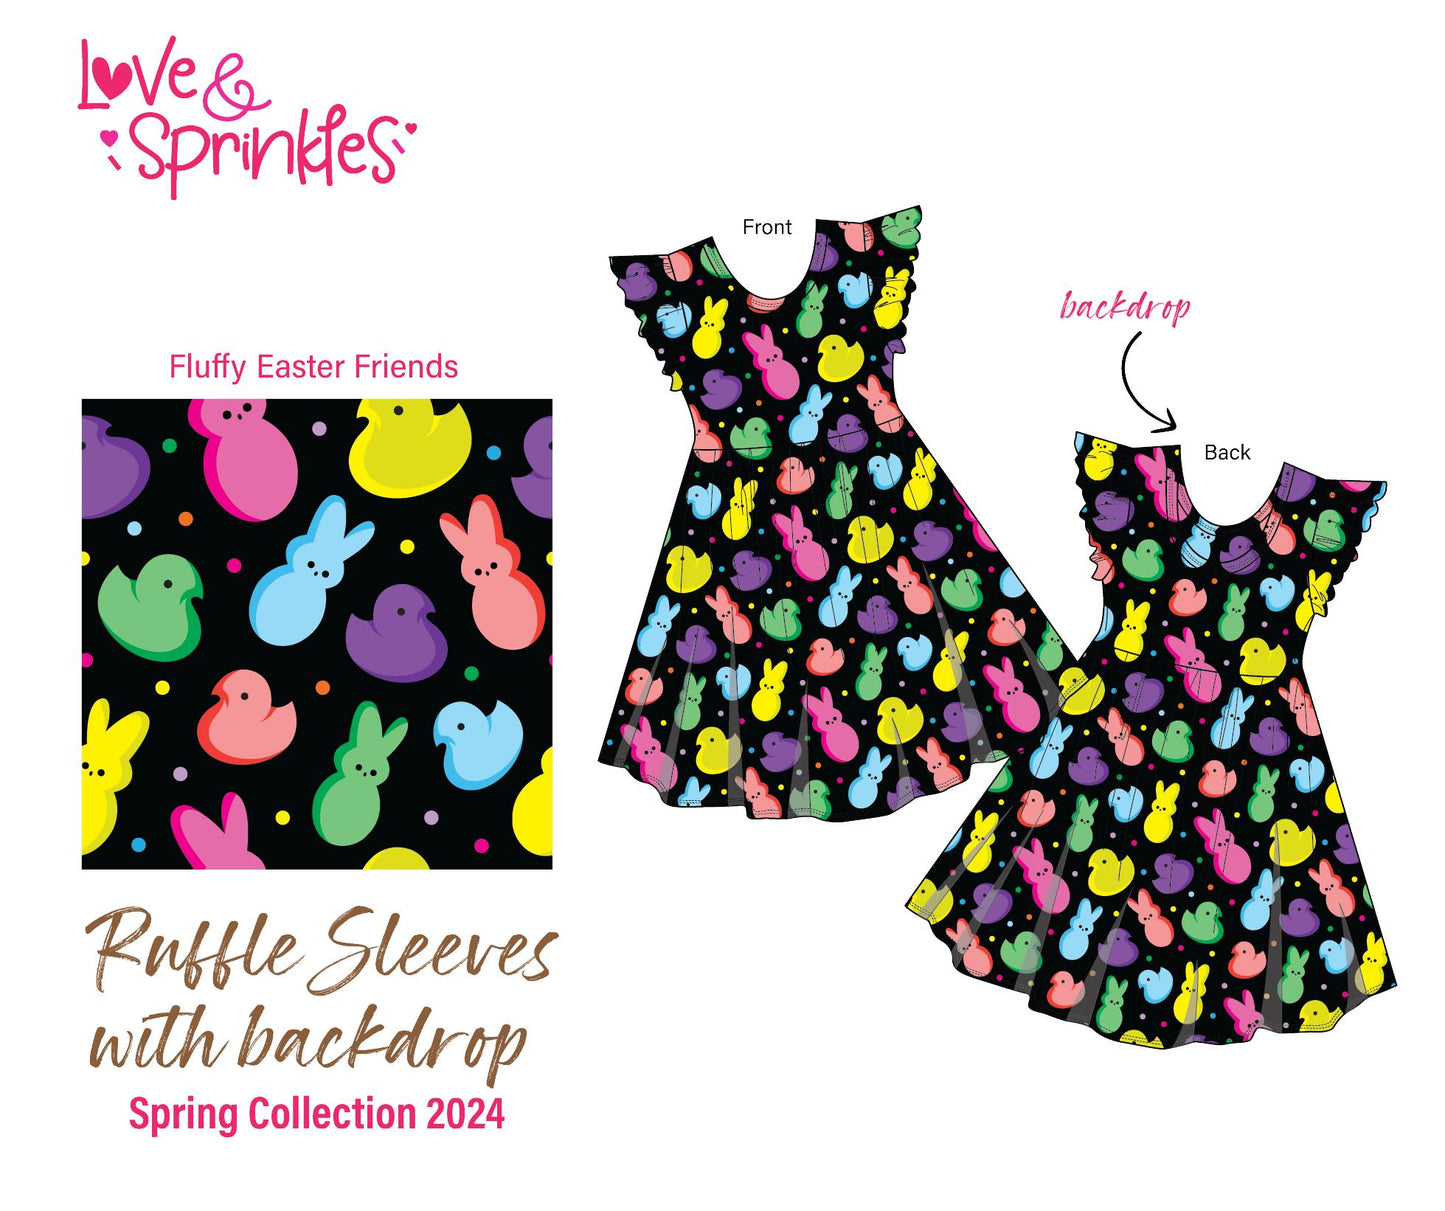 Love & Sprinkles Fluffy Easter Friends Ruffle Sleeve with Backdrop